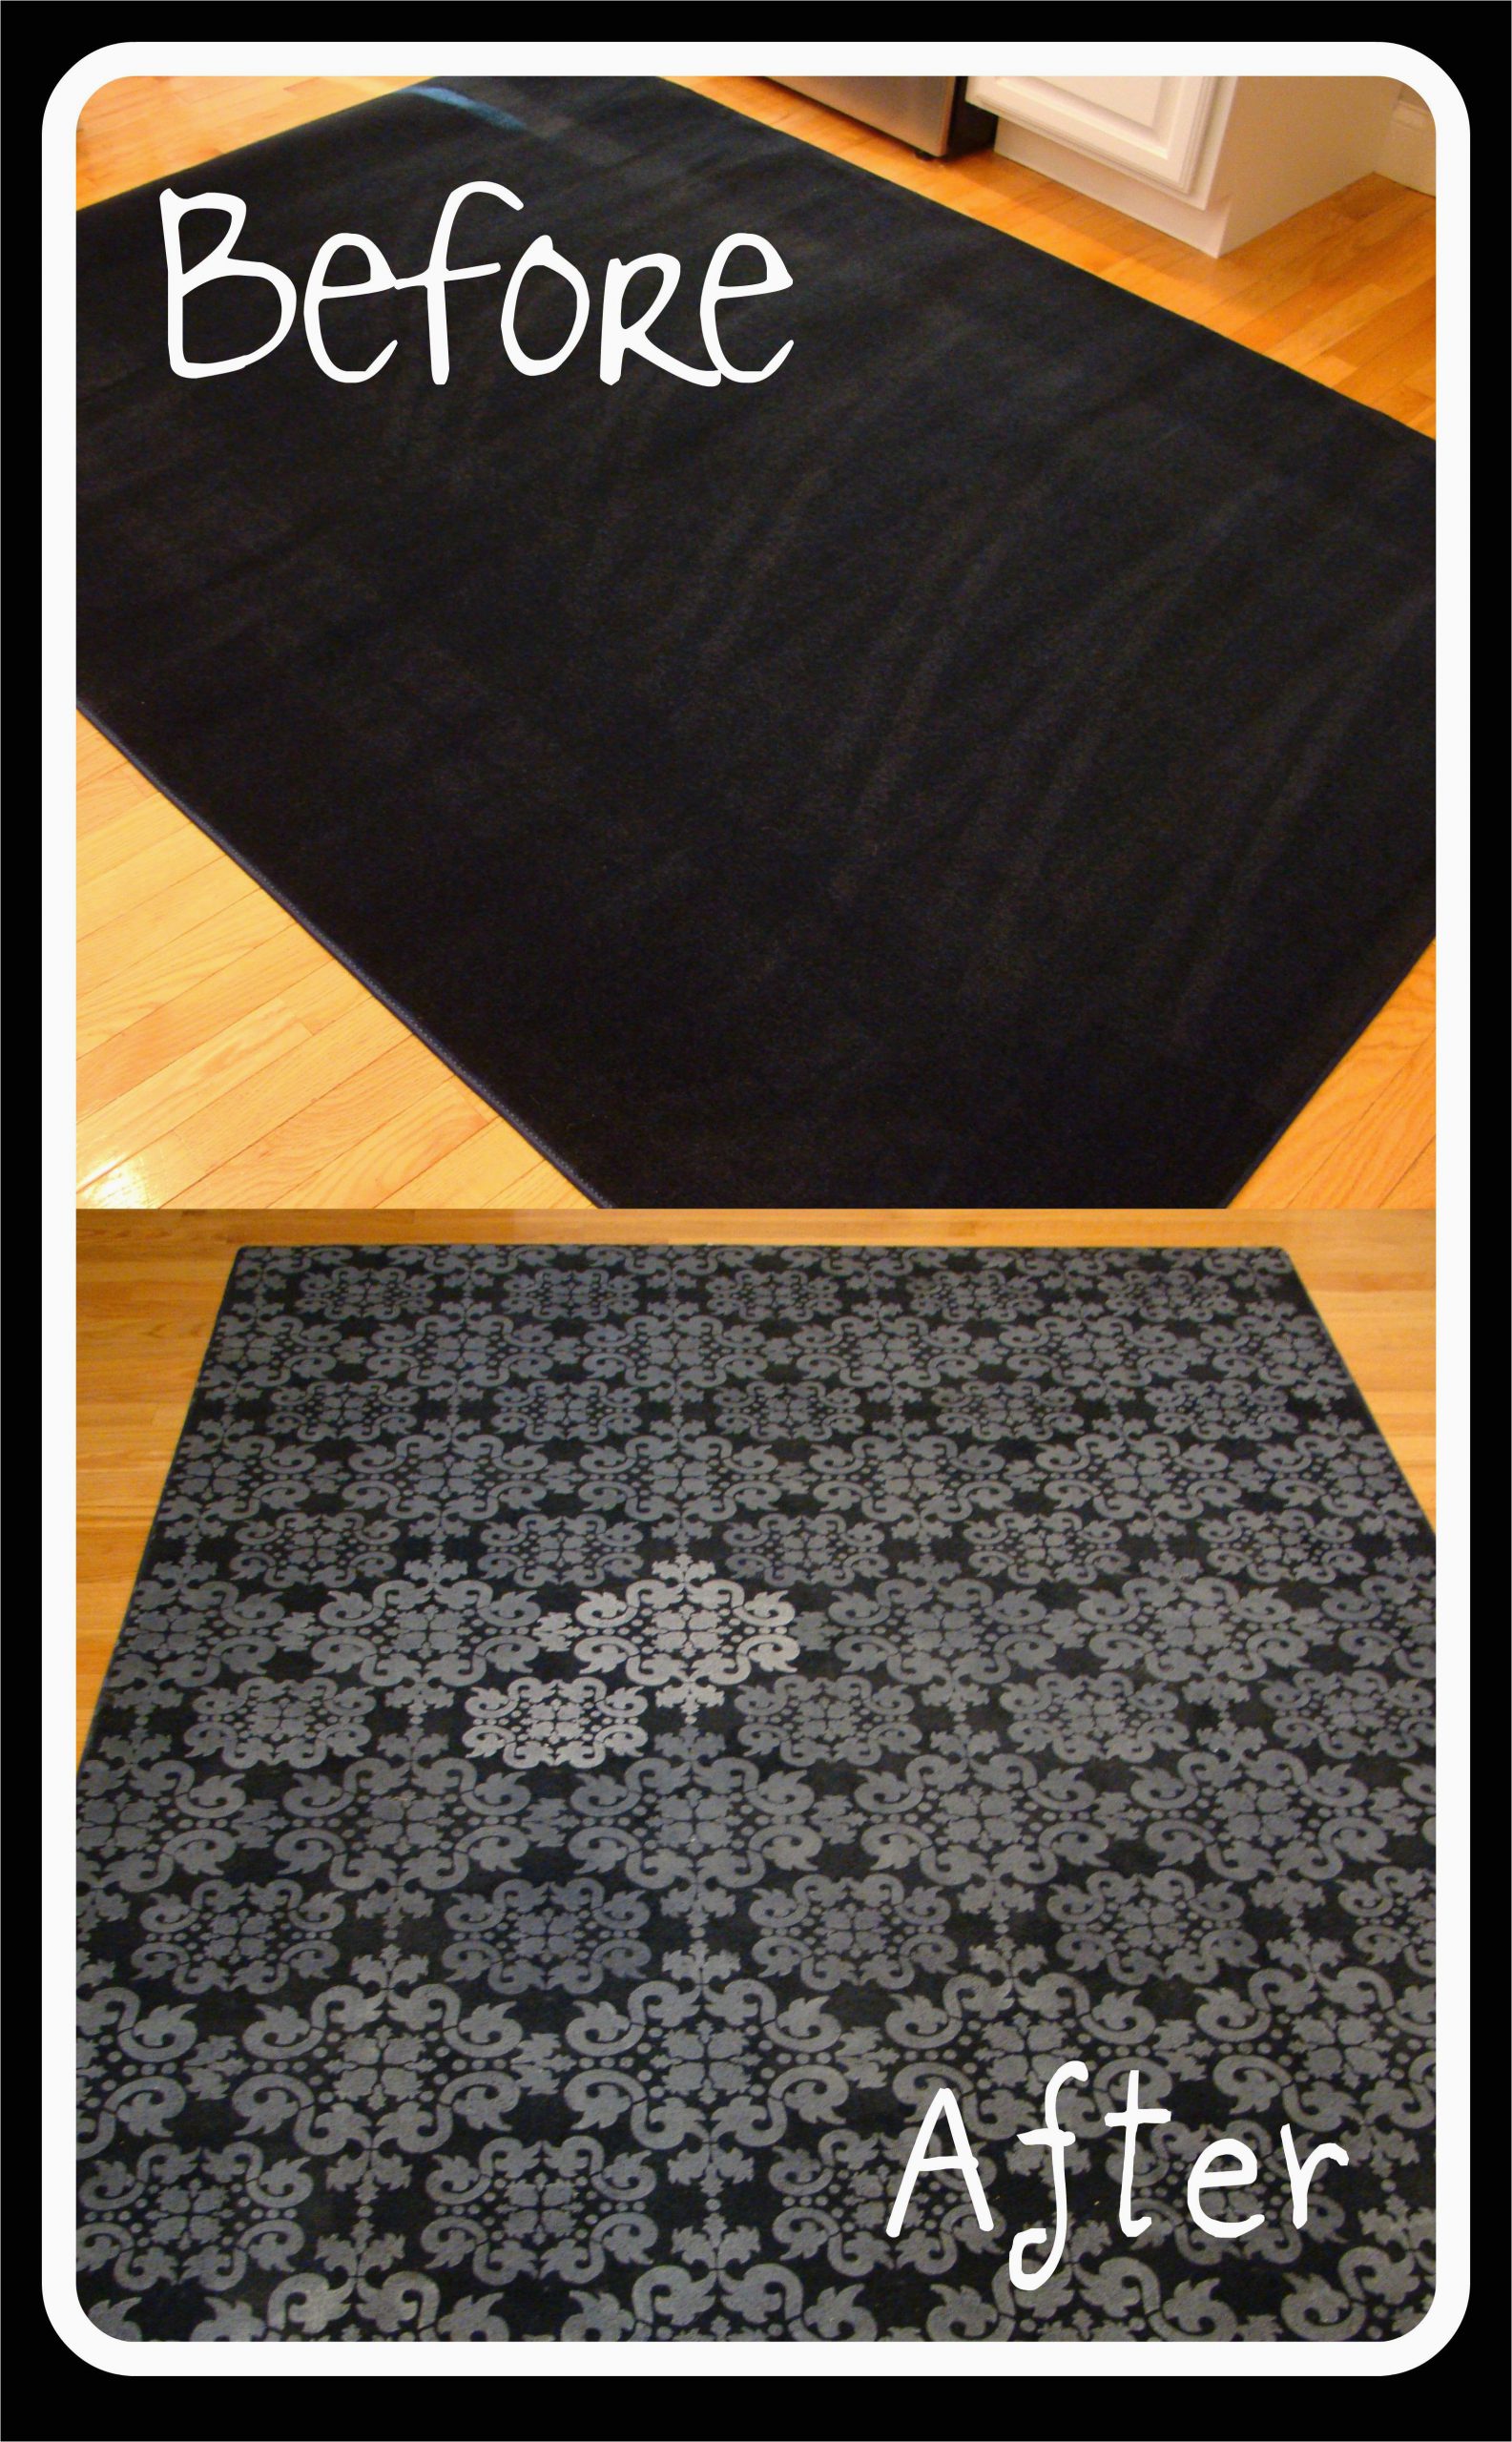 Area Rugs Under 100 Dollars Easy Diy area Rug for Paying $ 50 100 for A Rug Buy A